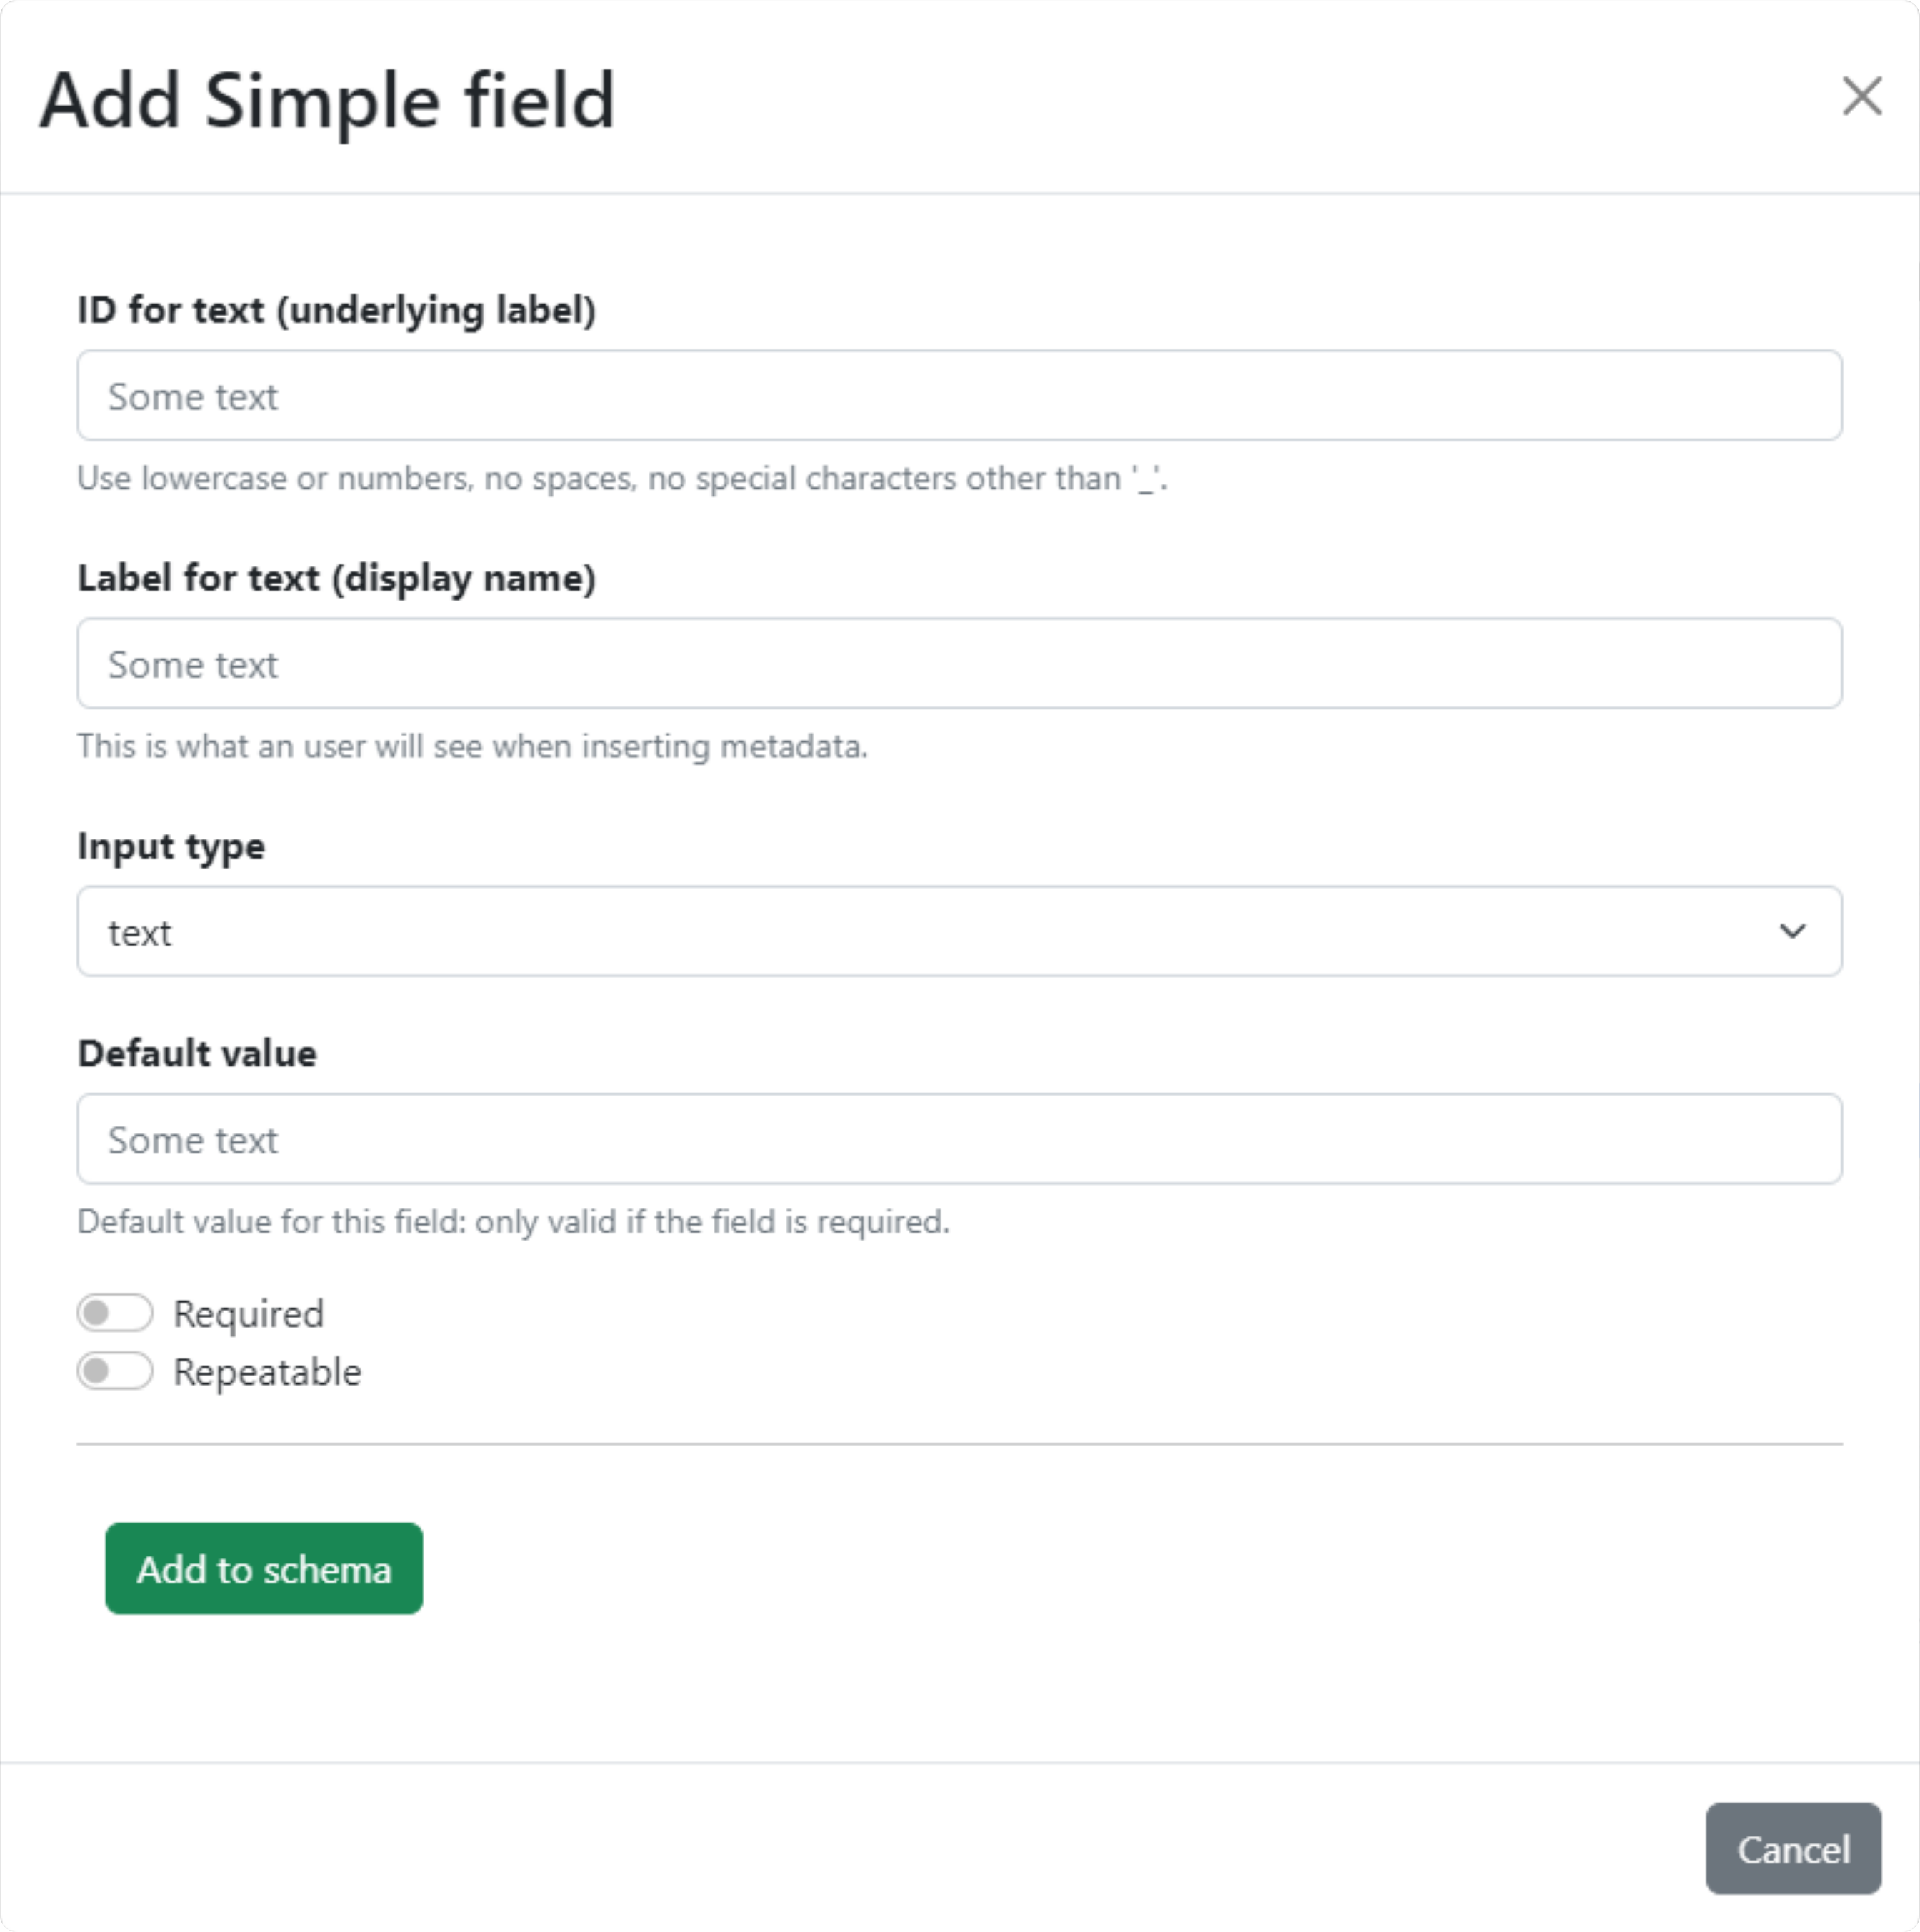 Form to create a simple field.